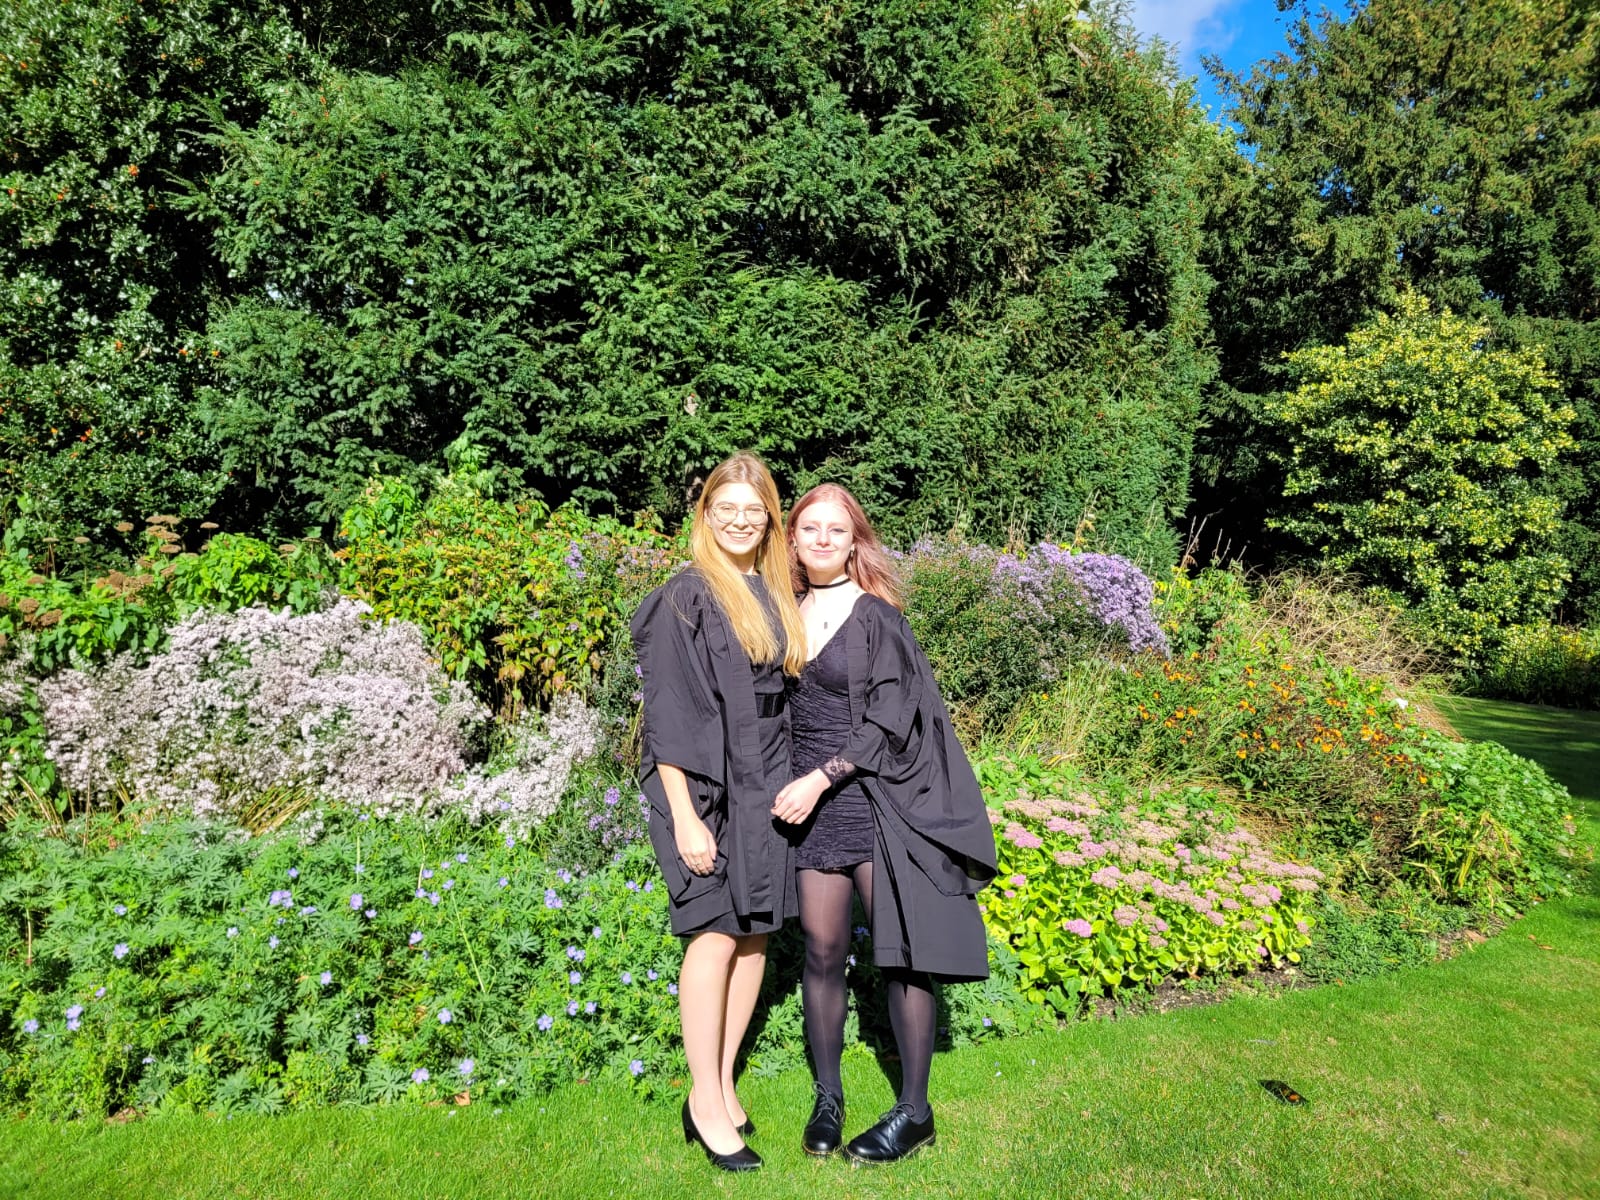 Two students in gowns, in front of some greenery